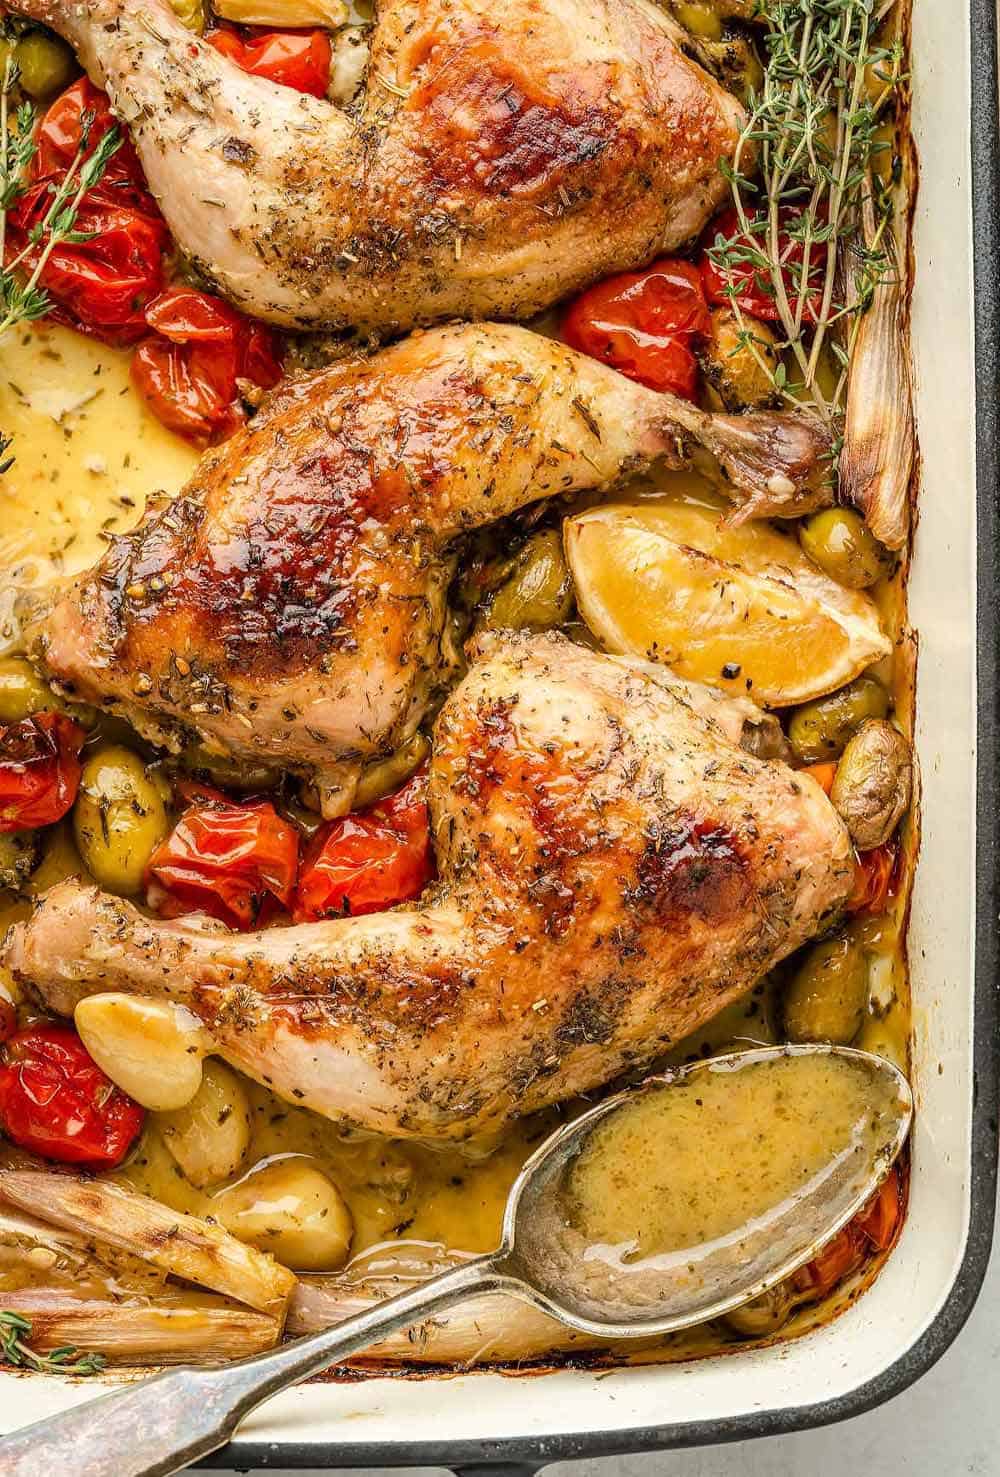 A golden-brown roasted chicken with crispy skin in a large roasting pan surrounded by cherry tomatoes, green olives, shallots, and garlic cloves. The pan juices are visible and a spoon is nearby for spooning the sauce over it.